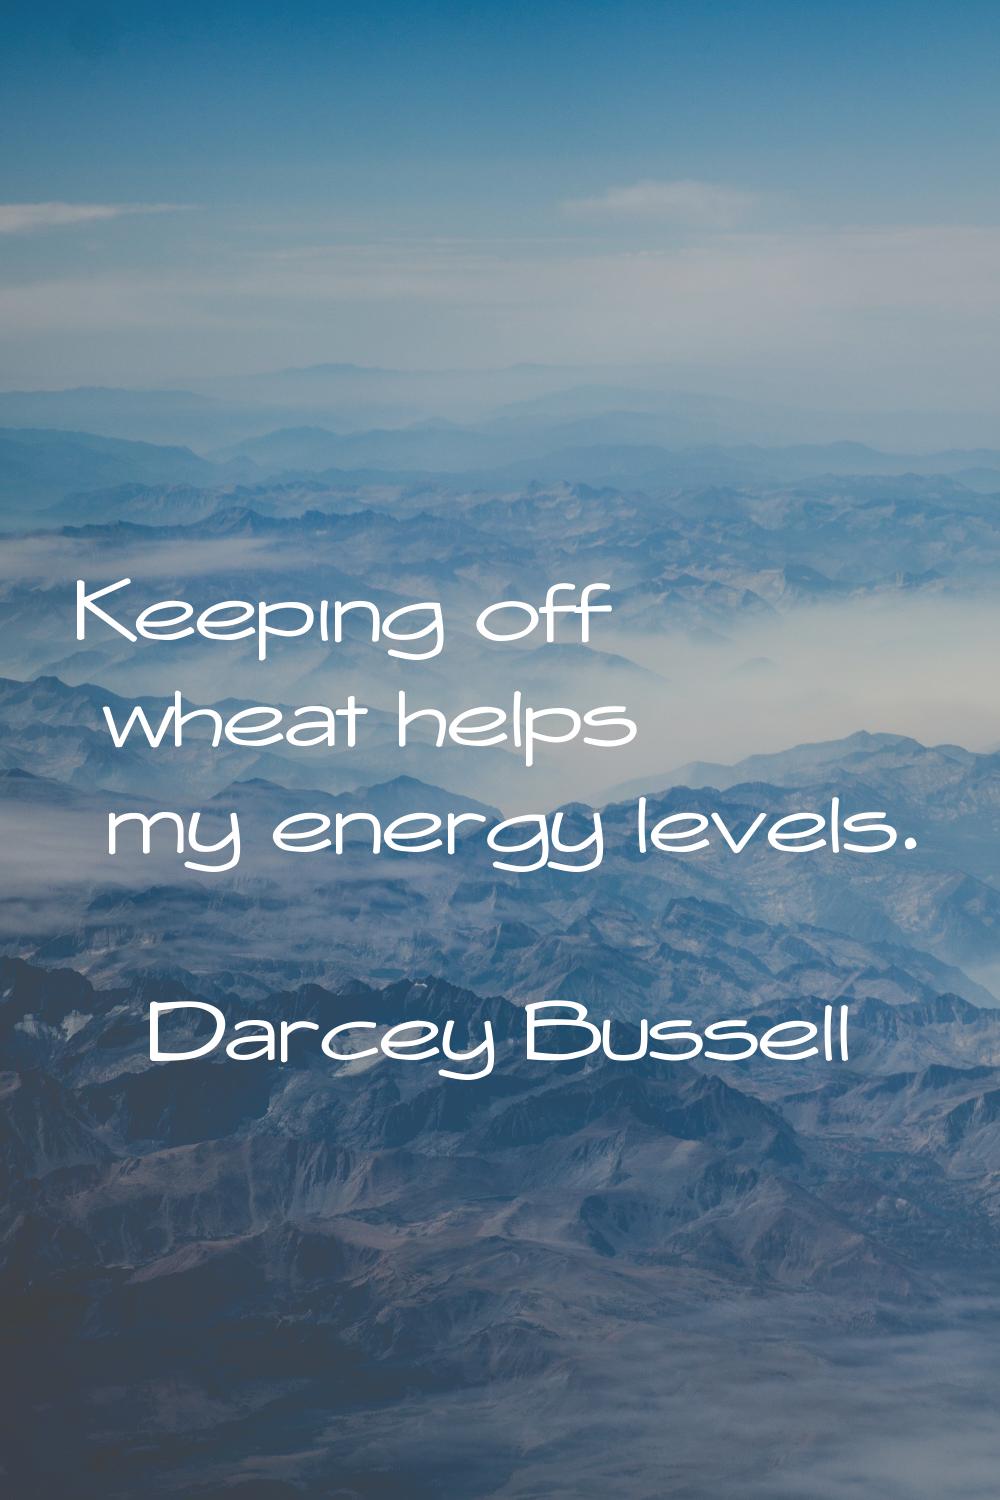 Keeping off wheat helps my energy levels.